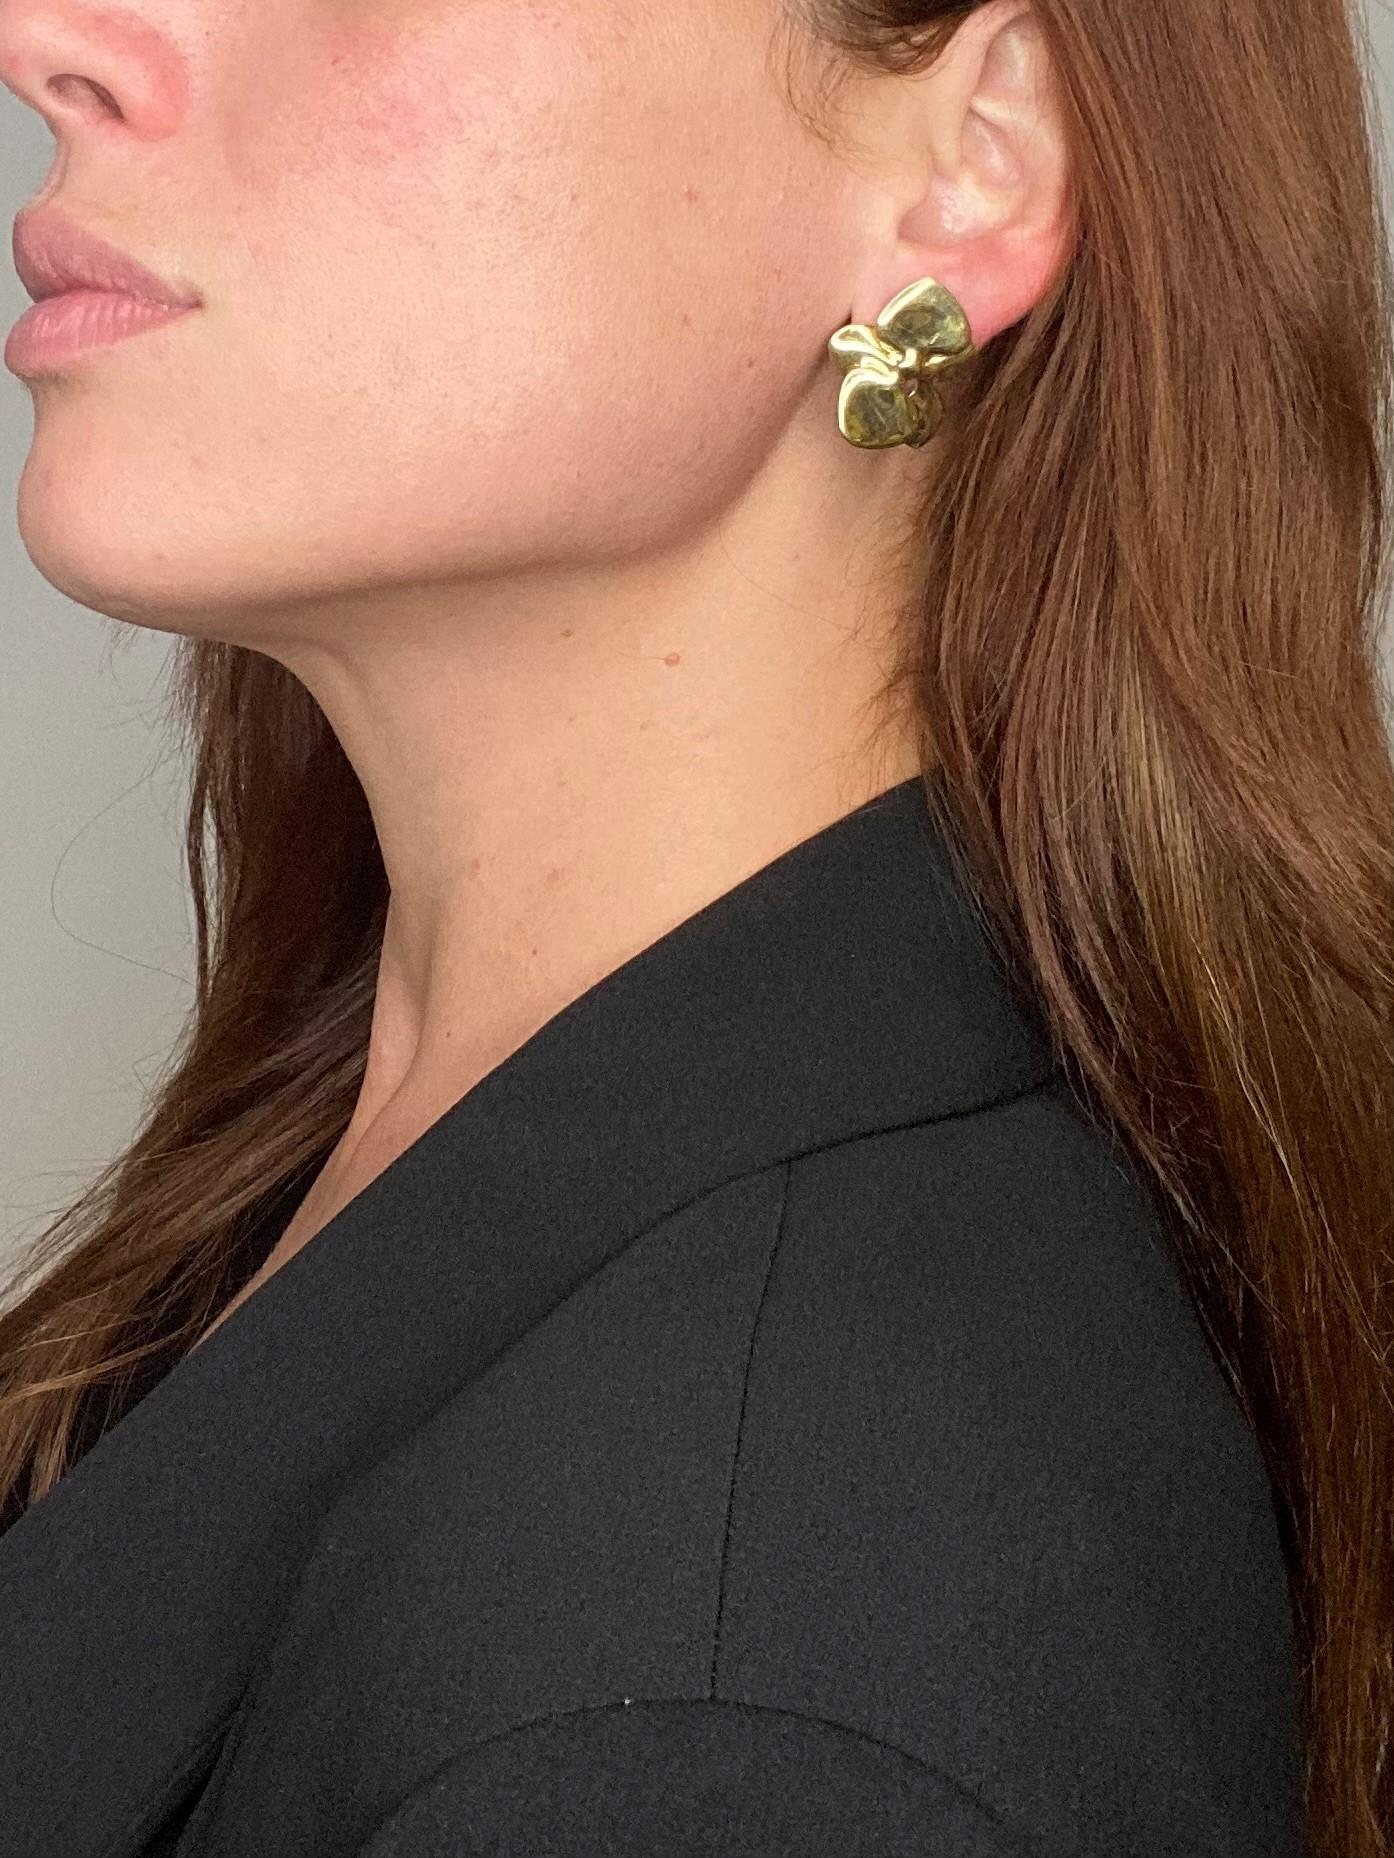 Lily petals Earrings designed by Angela Cummings.

Gorgeous and youthful organic pieces, created back in the 1984 at the Cummings studio in New York city. This one-of-a-kind pair, was crafted in solid yellow gold of 18 karats, with very high